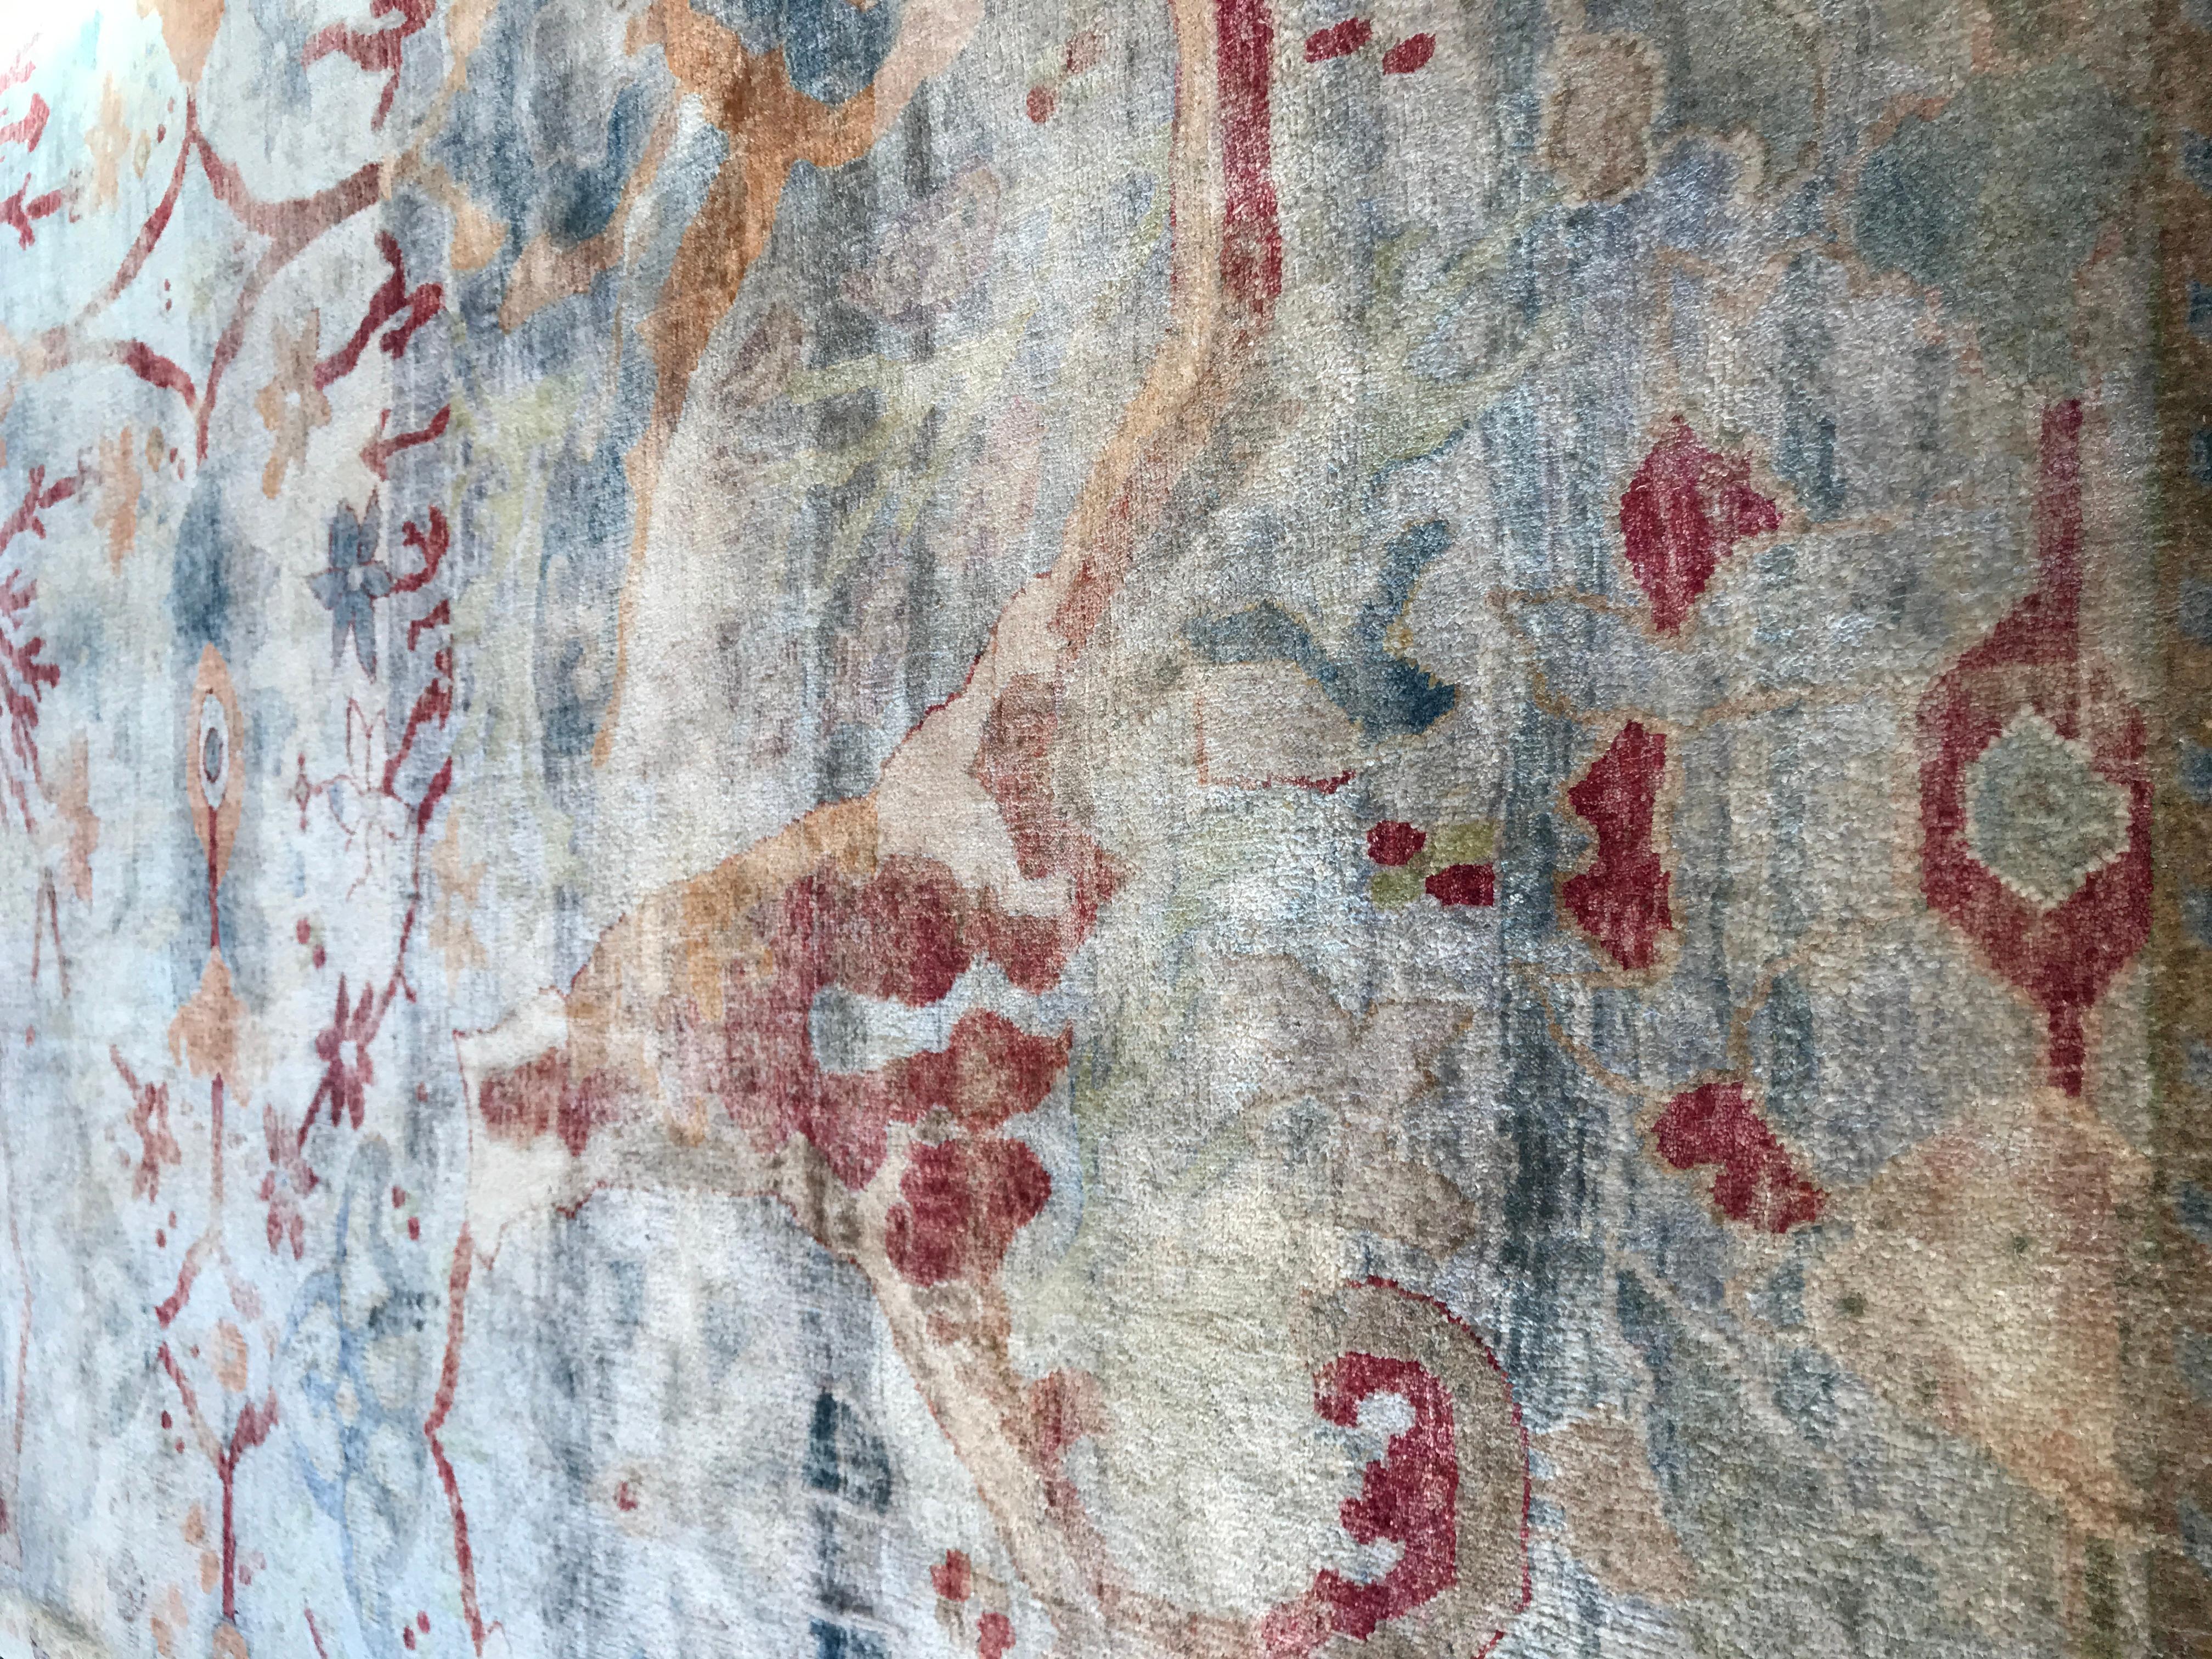 Hand-Crafted Arts & Crafts Inspired Hand-Knotted Rug Made with 100% Handspun Cocoon Silk For Sale